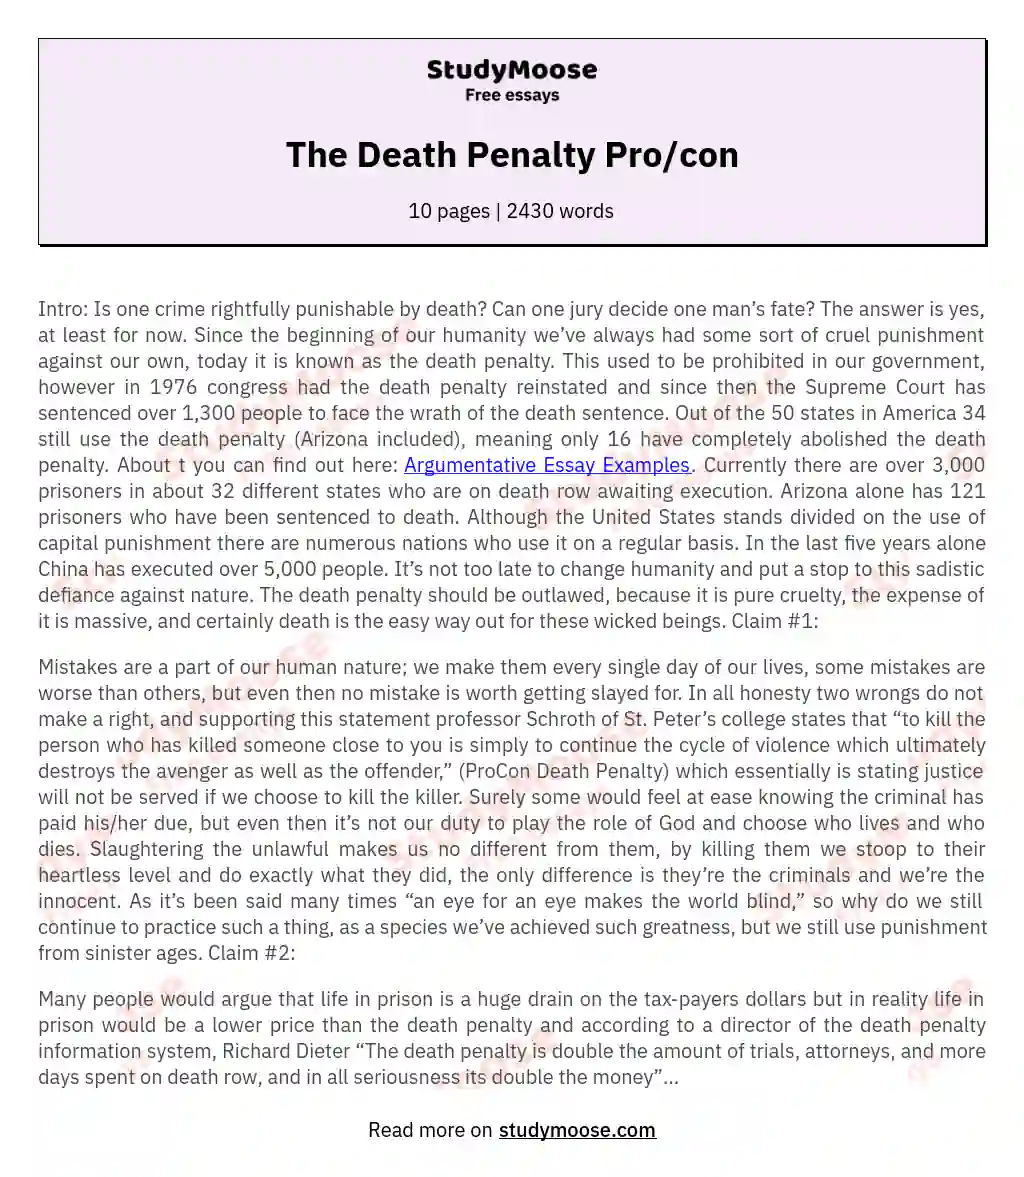 The Death Penalty Pro/con